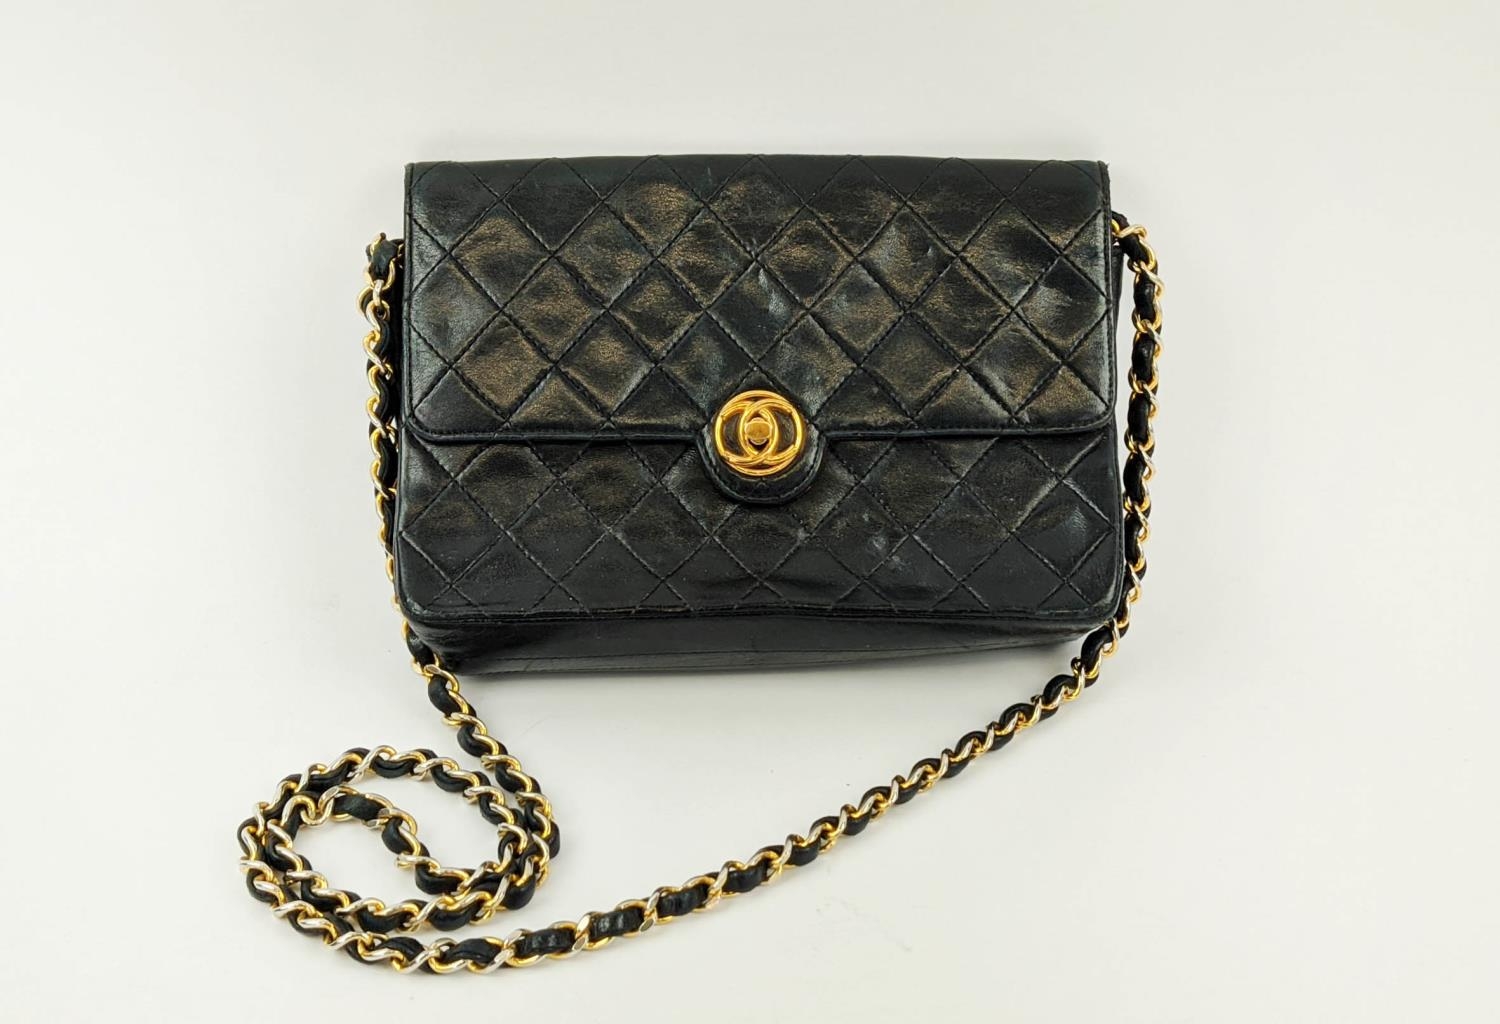 VINTAGE CHANEL FLAP BAG, round turn-lock, iconic burgundy leather lining, quilted front and back